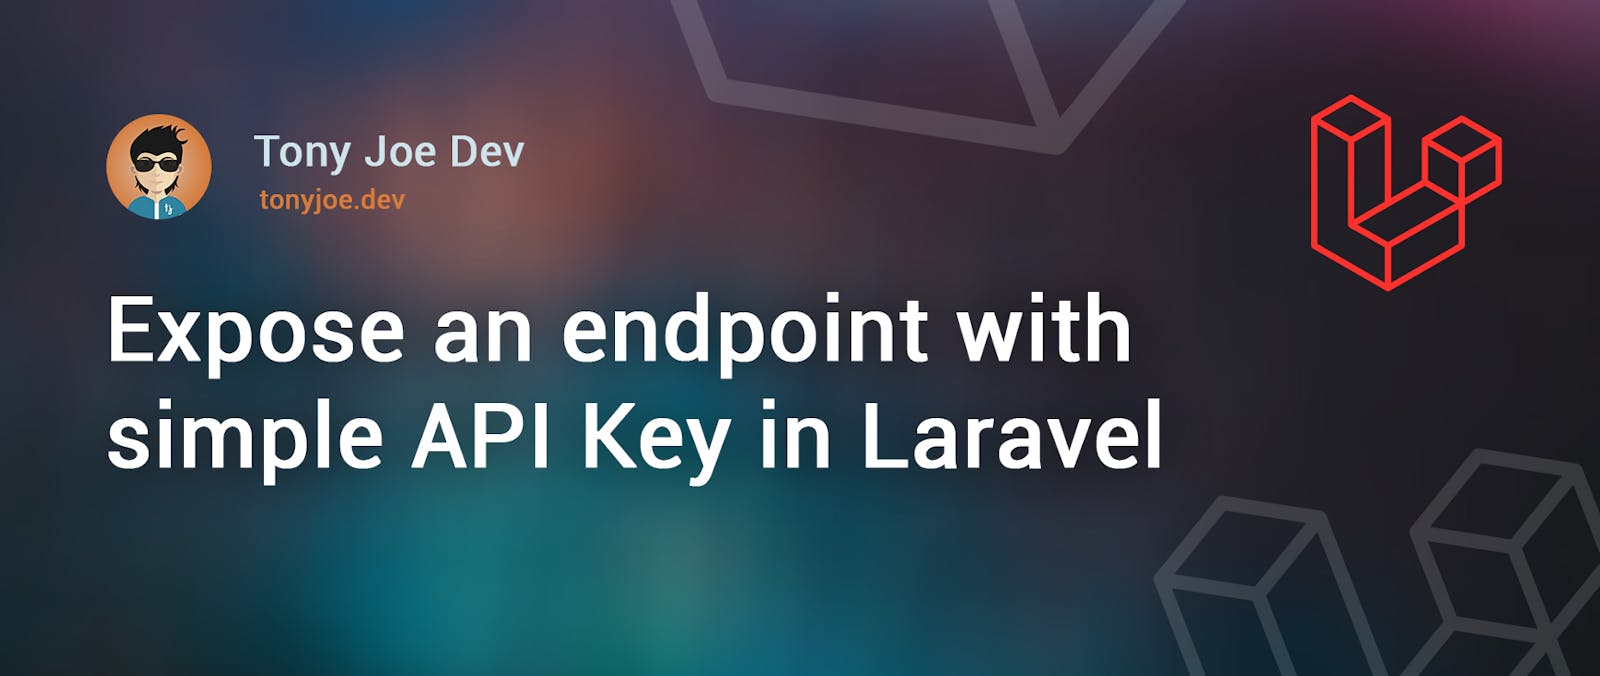 How to simply expose an endpoint with API Key in Laravel